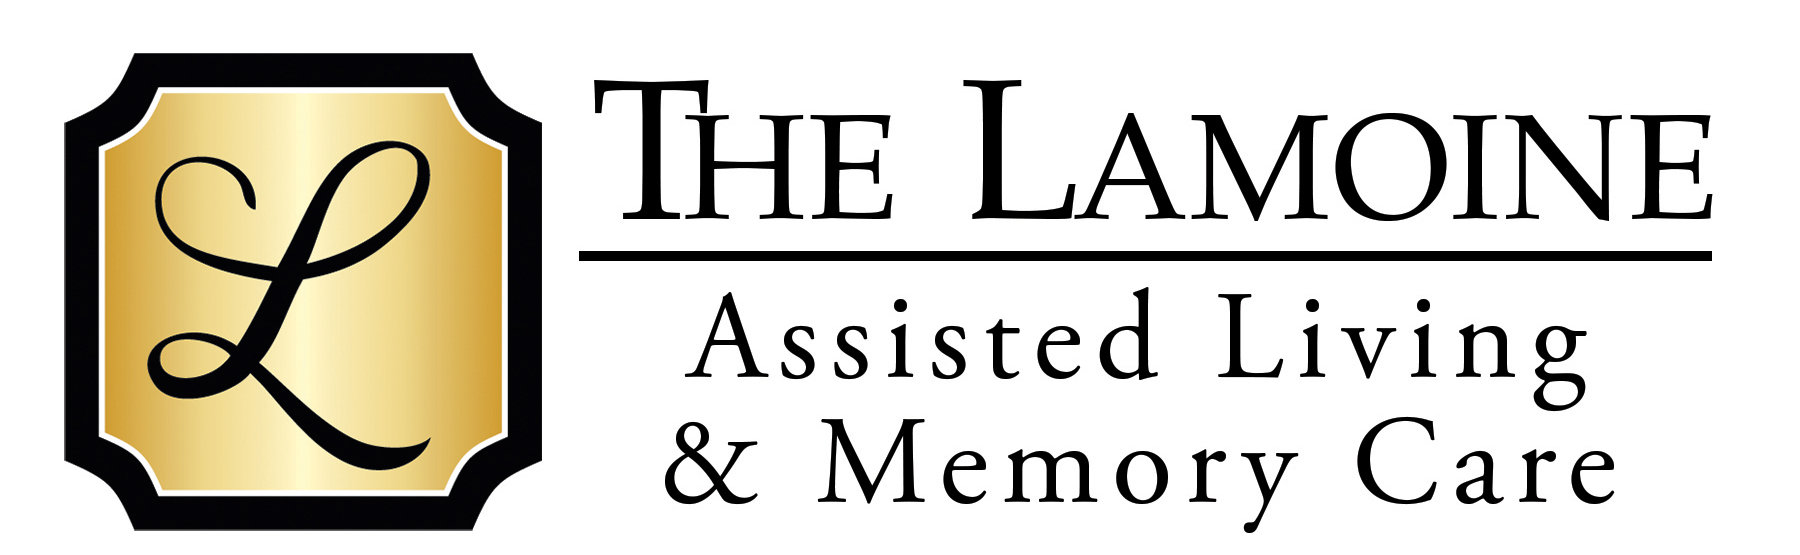 The Lamoine - Assisted Living & Memory Care Logo